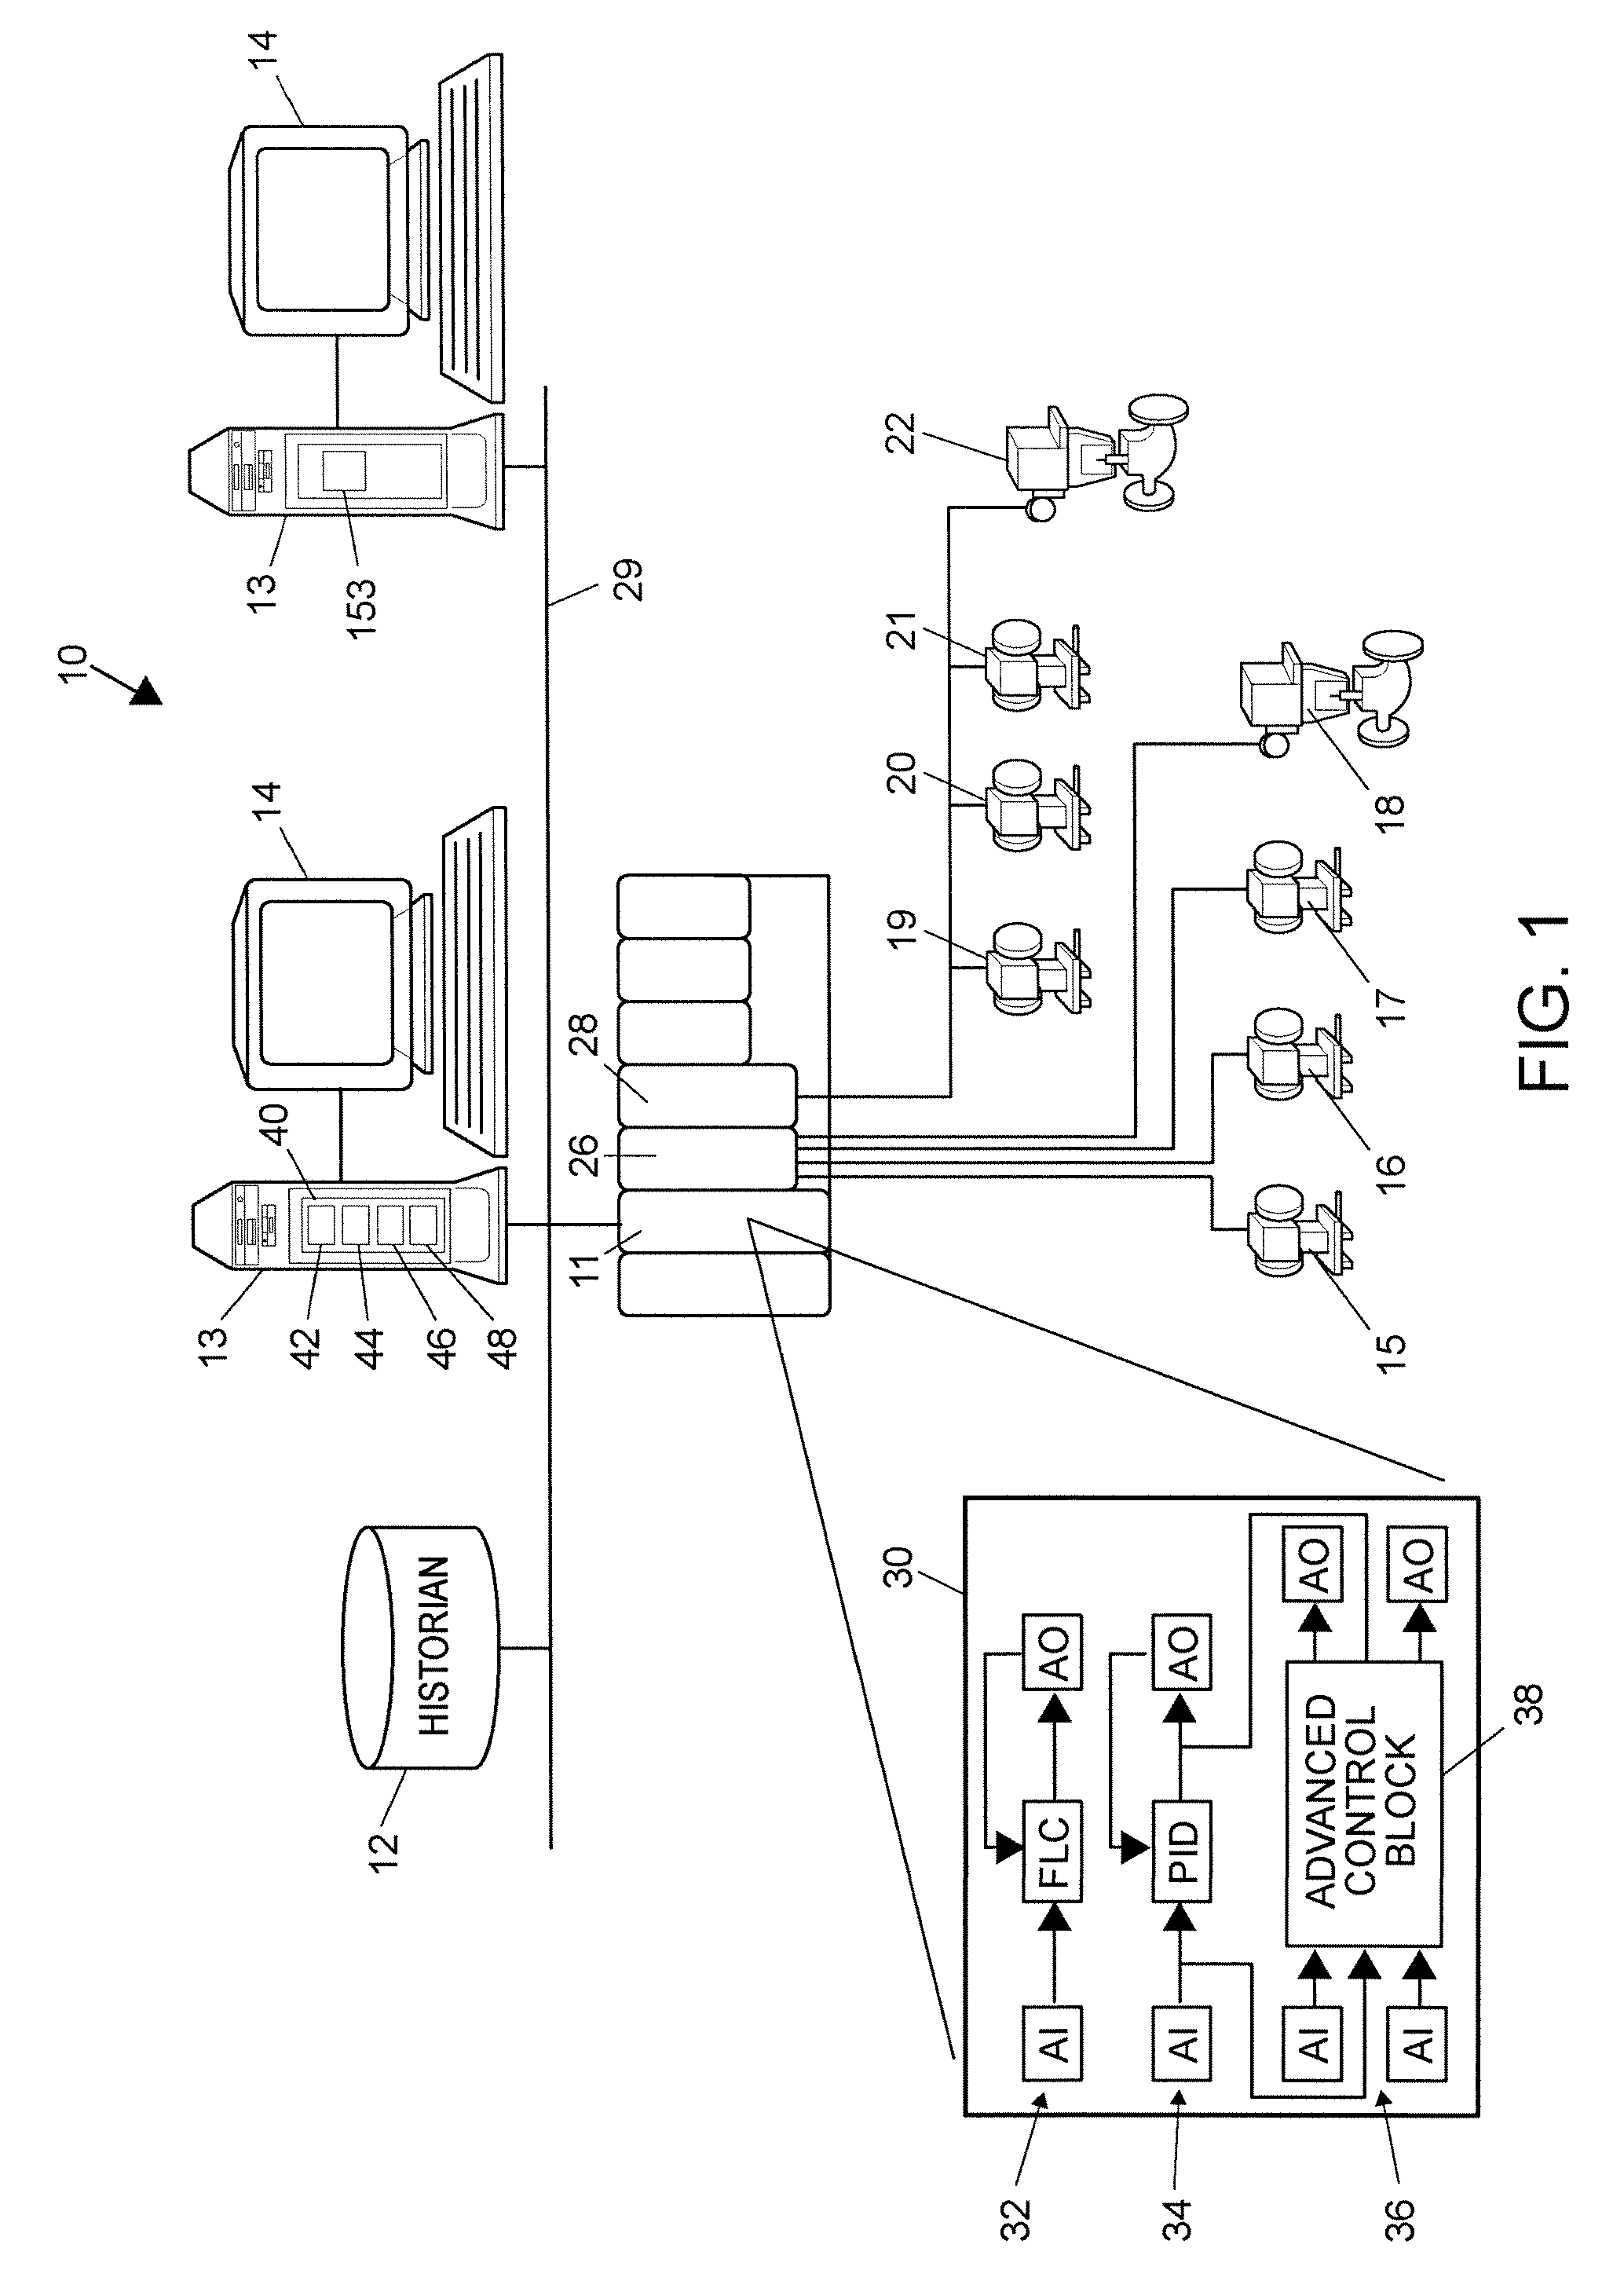 Configuration and viewing display for an integrated model predictive control and optimizer function block